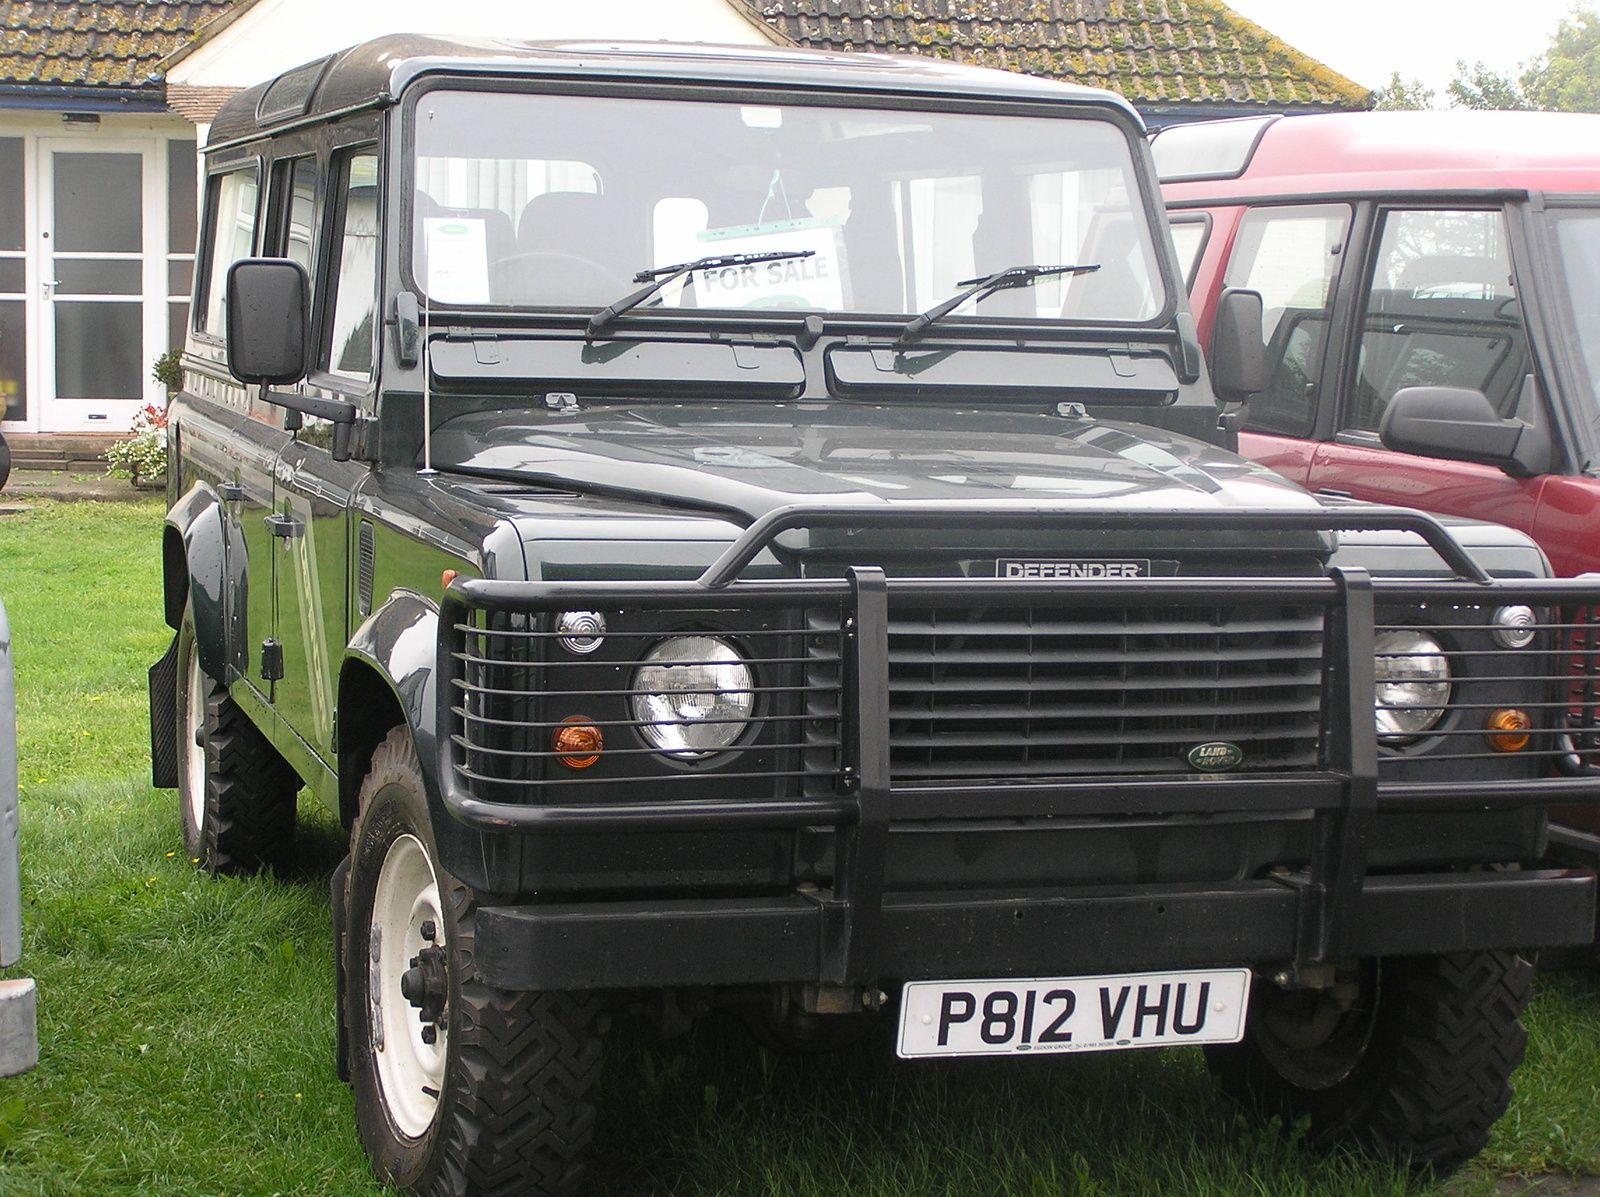 1997 Land Rover Logo - 1997 Land Rover Defender - Overview - CarGurus